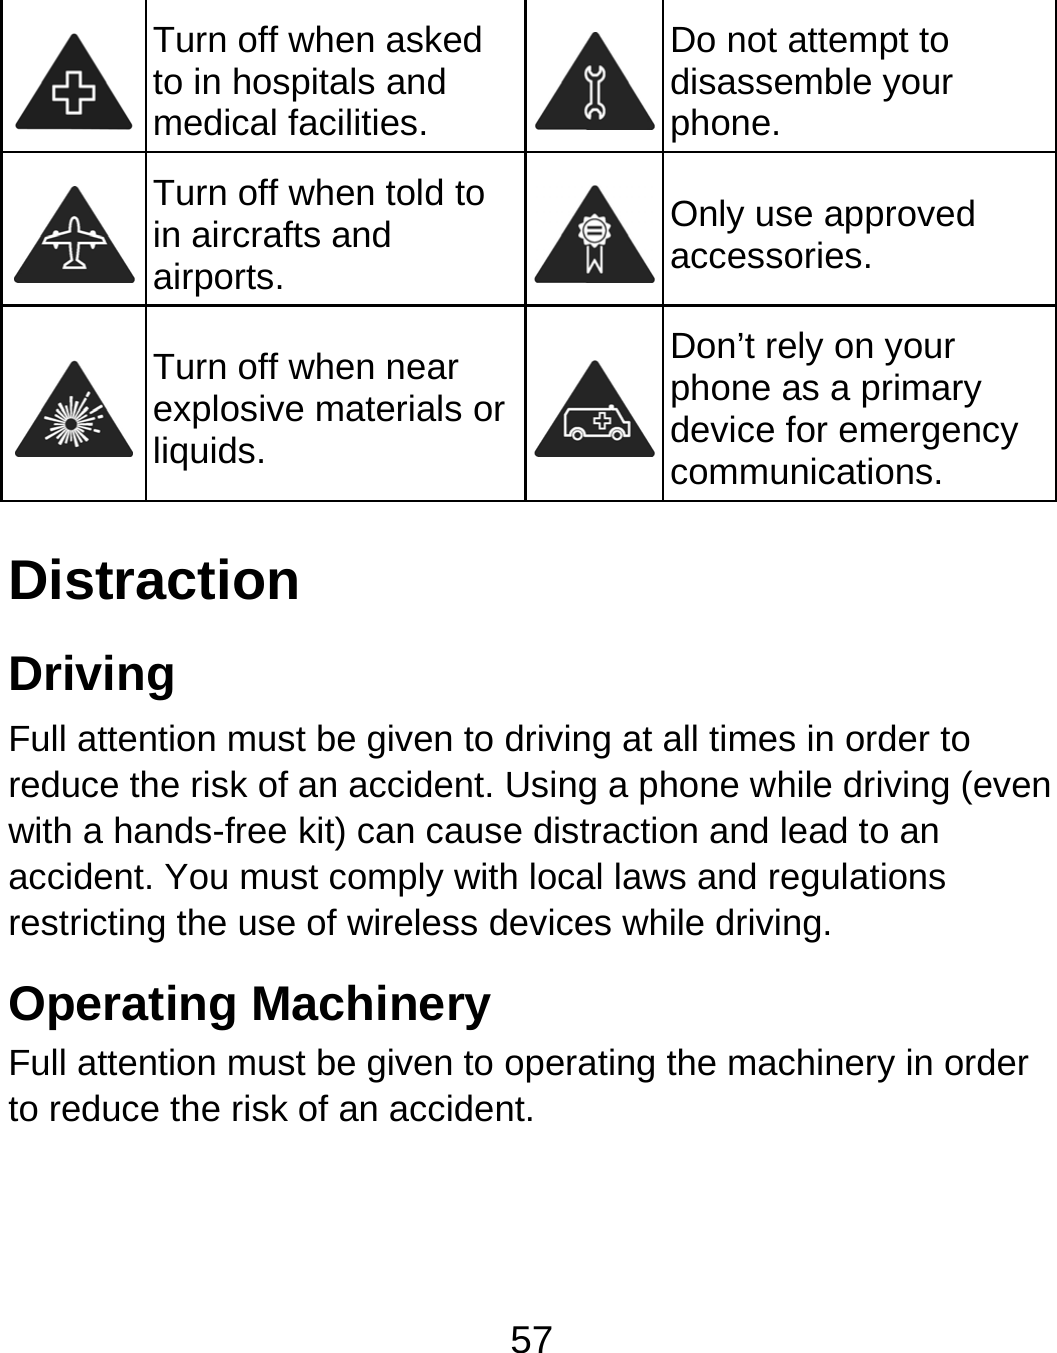 57  Turn off when asked to in hospitals and medical facilities. Do not attempt to disassemble your phone.  Turn off when told to in aircrafts and airports. Only use approved accessories.  Turn off when near explosive materials or liquids. Don’t rely on your phone as a primary device for emergency communications.  Distraction Driving Full attention must be given to driving at all times in order to reduce the risk of an accident. Using a phone while driving (even with a hands-free kit) can cause distraction and lead to an accident. You must comply with local laws and regulations restricting the use of wireless devices while driving. Operating Machinery Full attention must be given to operating the machinery in order to reduce the risk of an accident. 